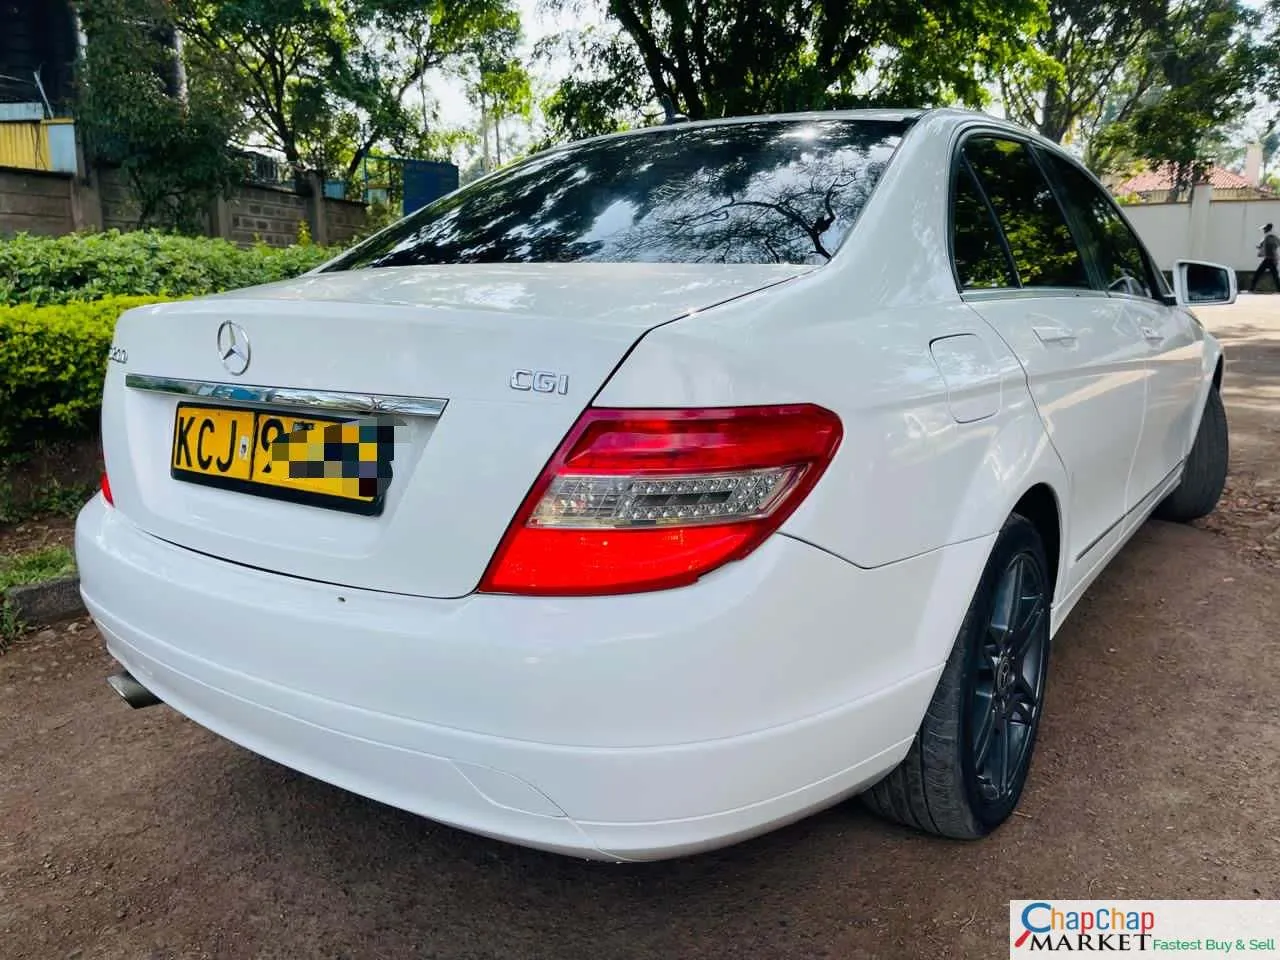 Mercedes Benz C200 QUICK SALE 🔥 You Pay 30% DEPOSIT Trade in OK EXCLUSIVE Hire purchase installments